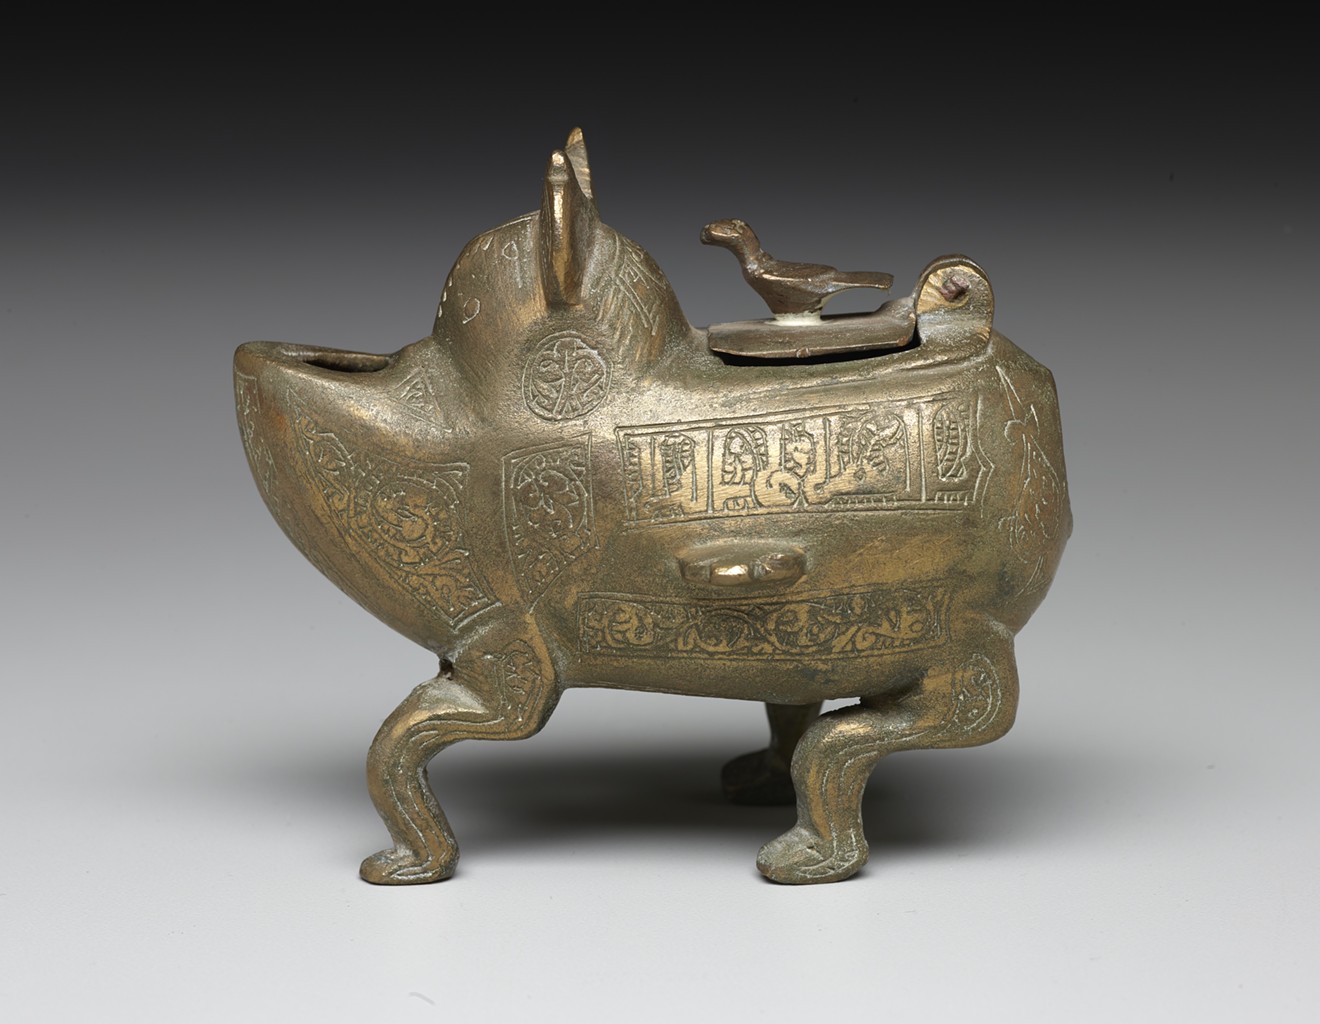 Much of the art on display at the DMA takes the shape of animals and humans, like this oil lamp in the form of a fabulous beast.